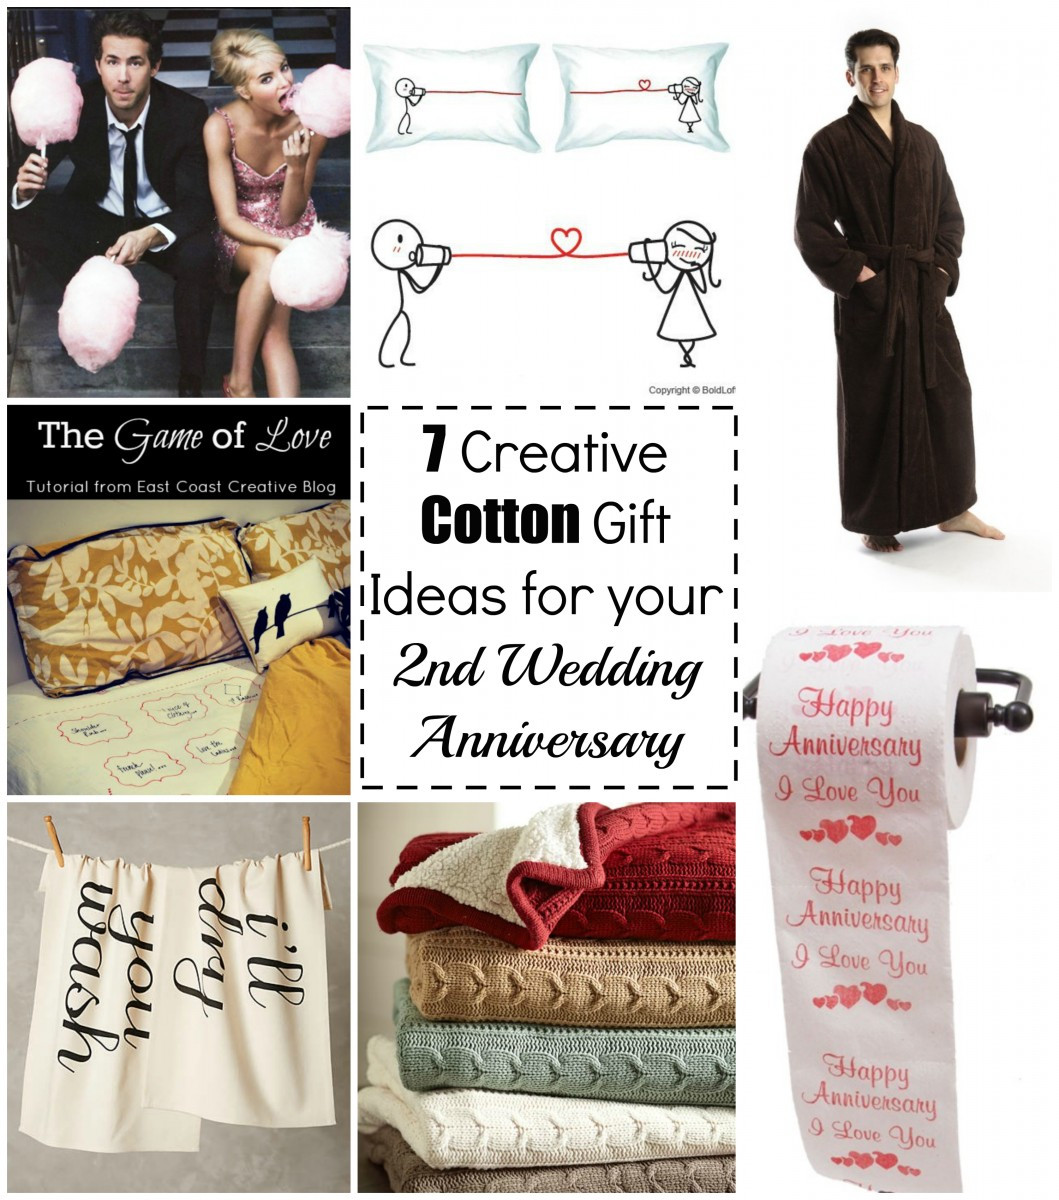 2 Year Anniversary Cotton Gift Ideas
 7 Cotton Gift Ideas for your 2nd Wedding Anniversary